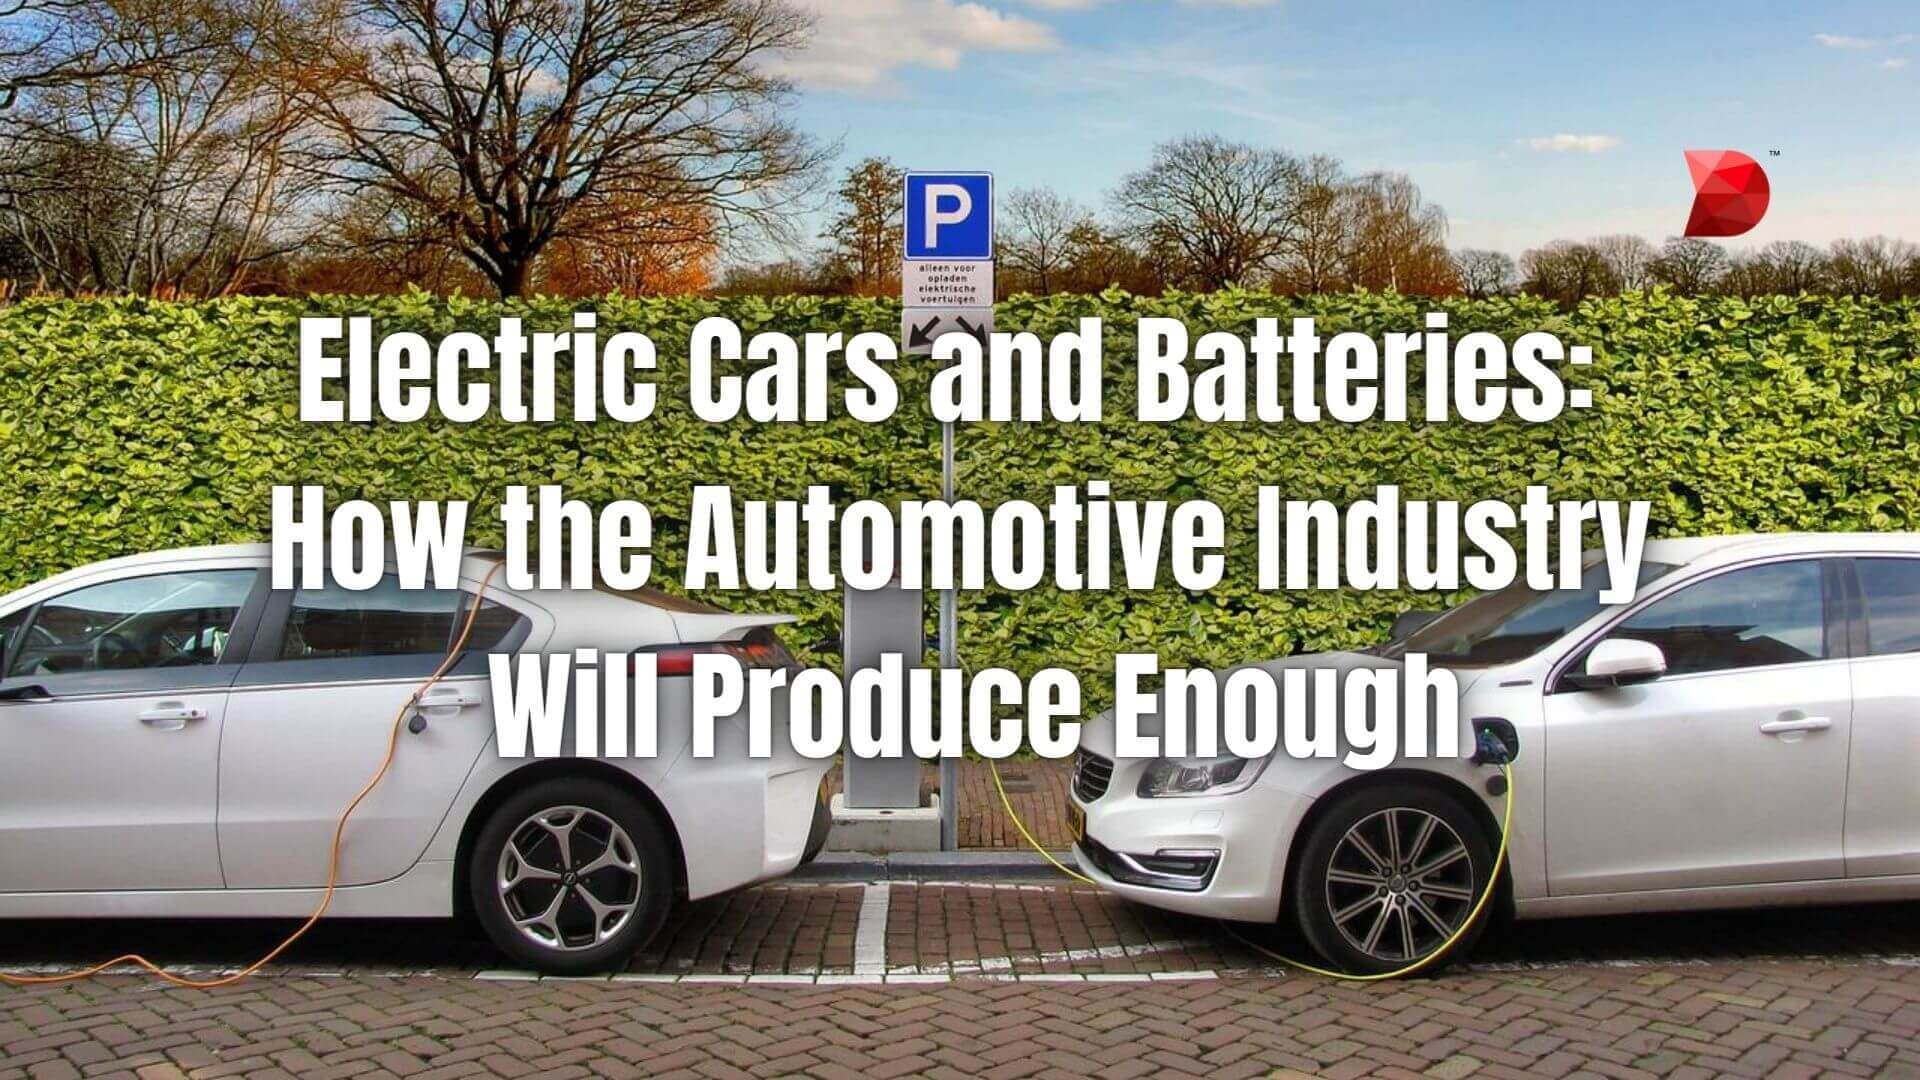 Electric Cars and Batteries How the Automotive Industry Will Produce Enough